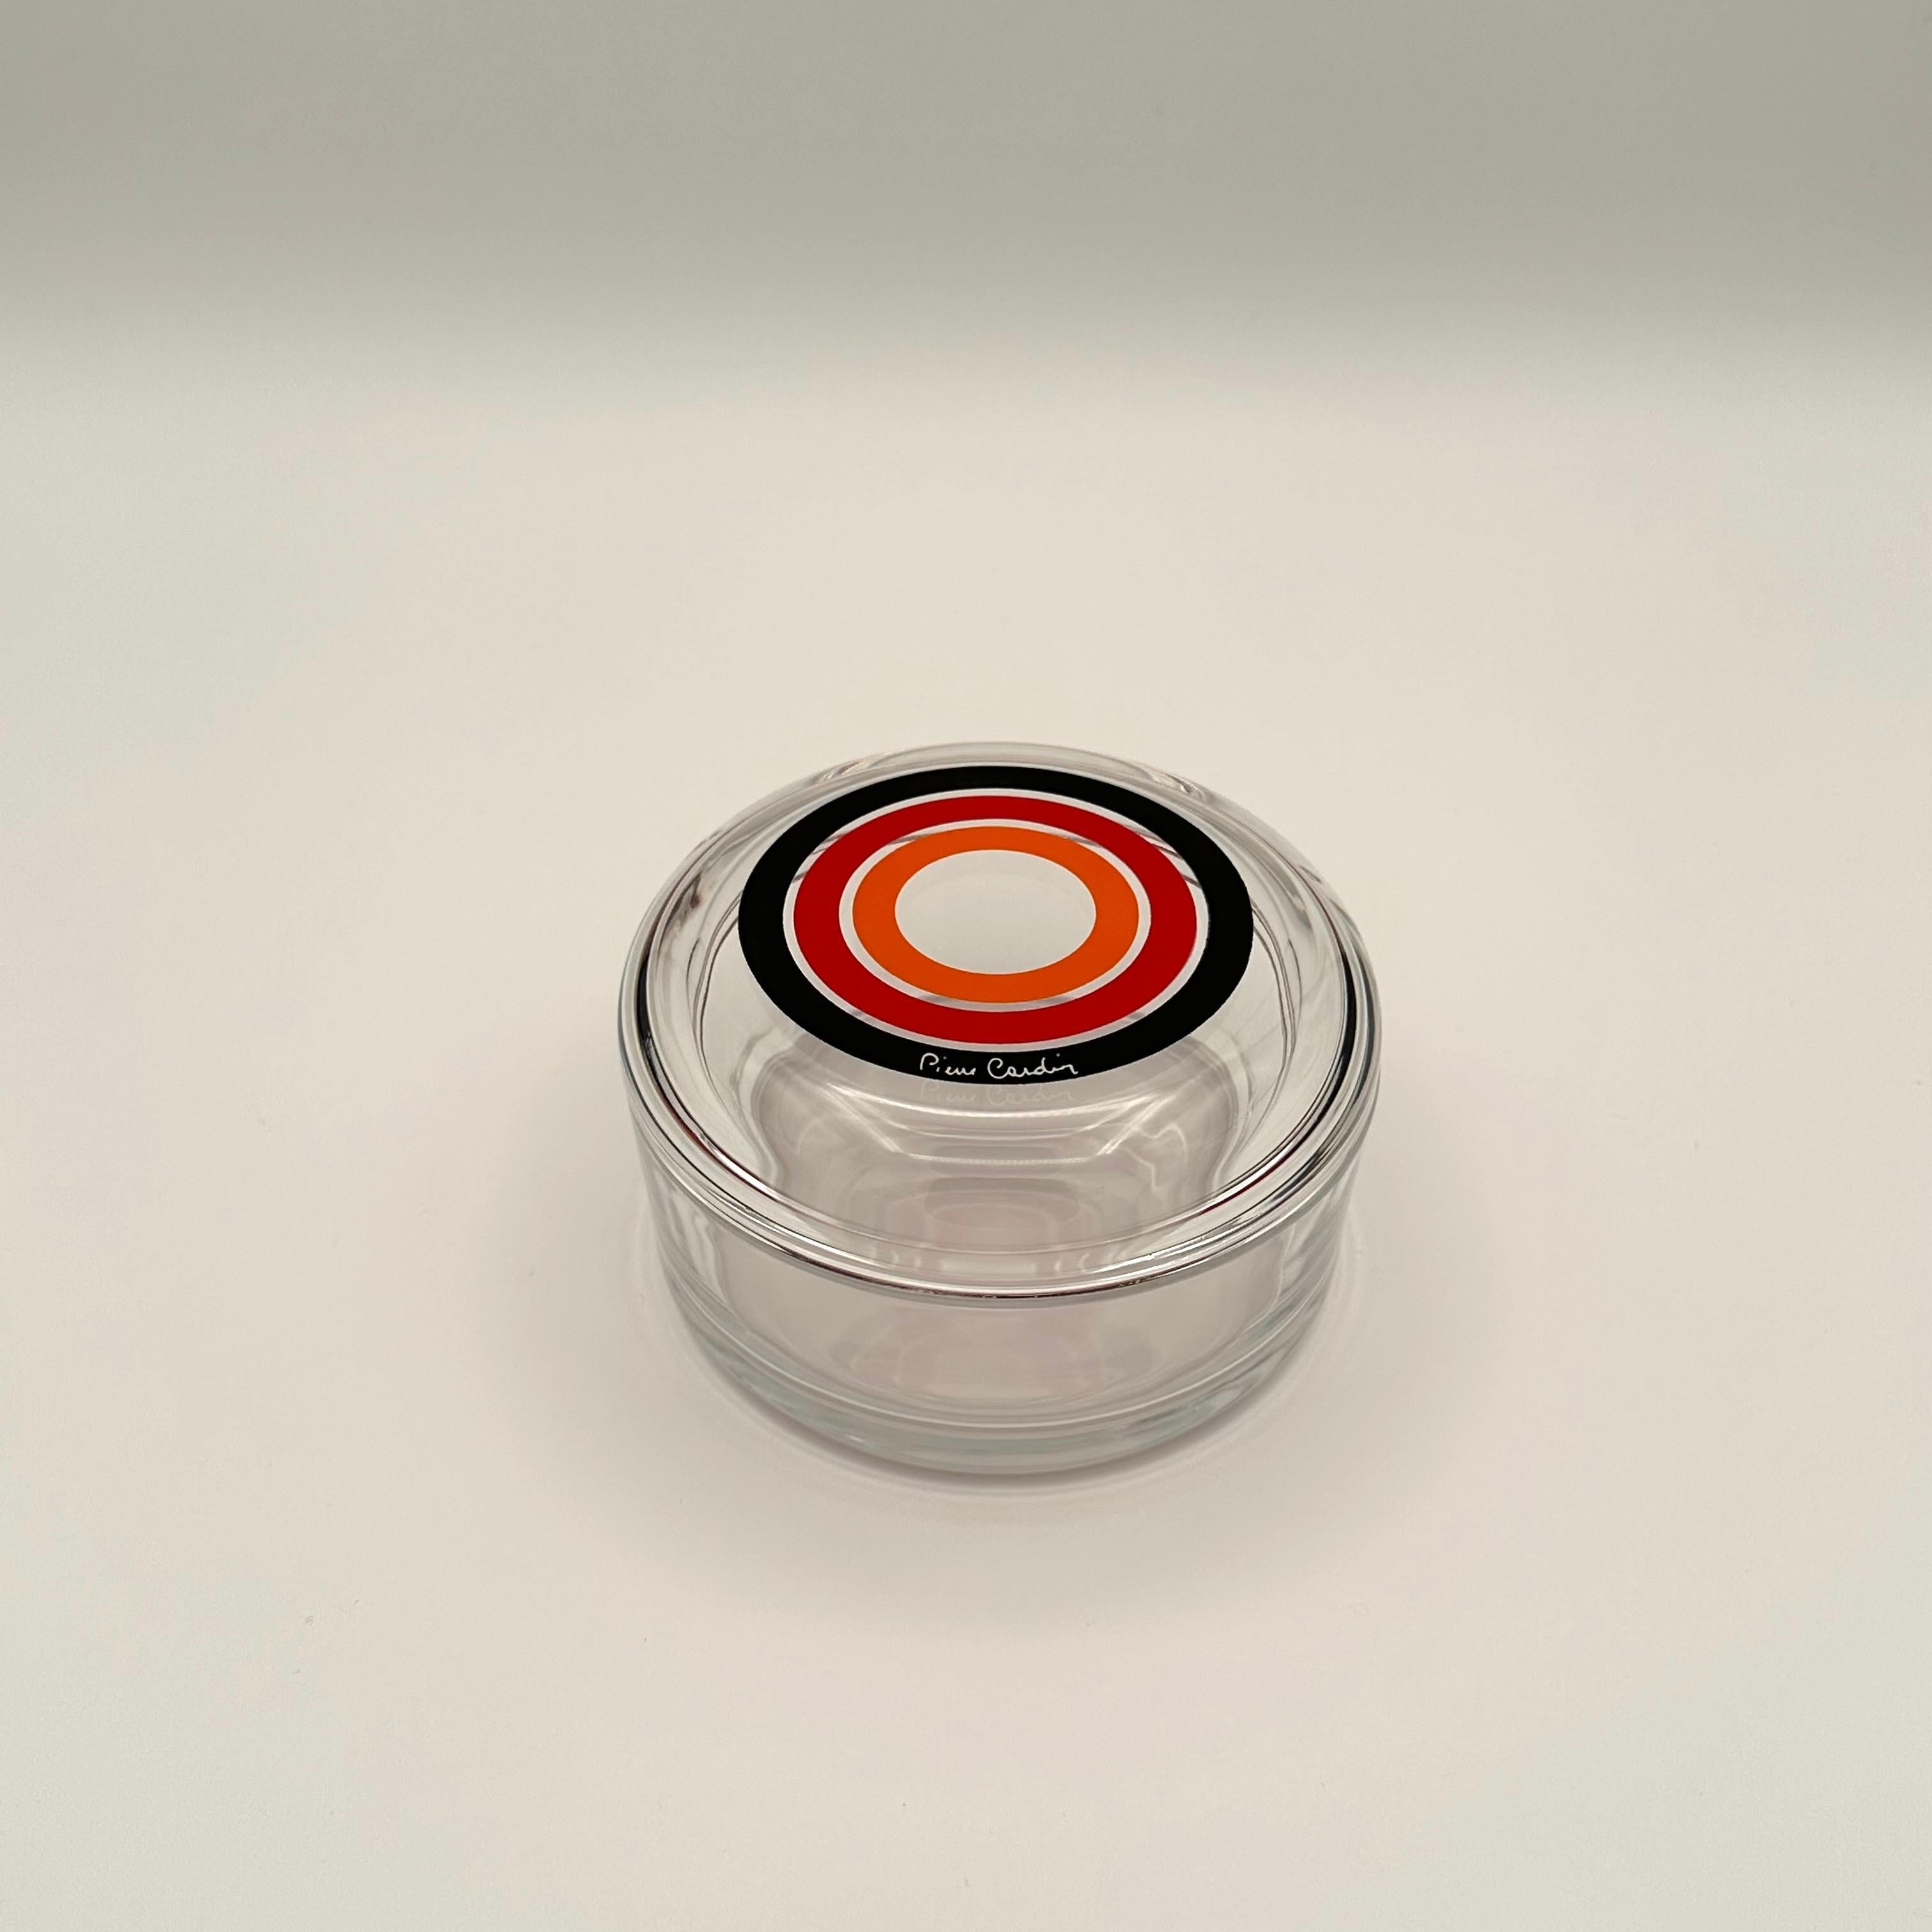 Vintage Pierre Cardin for Sasaki Glass Bowl in Red, Orange and Black. Space Age target bullseye design in concentric black, red and orange circles. 